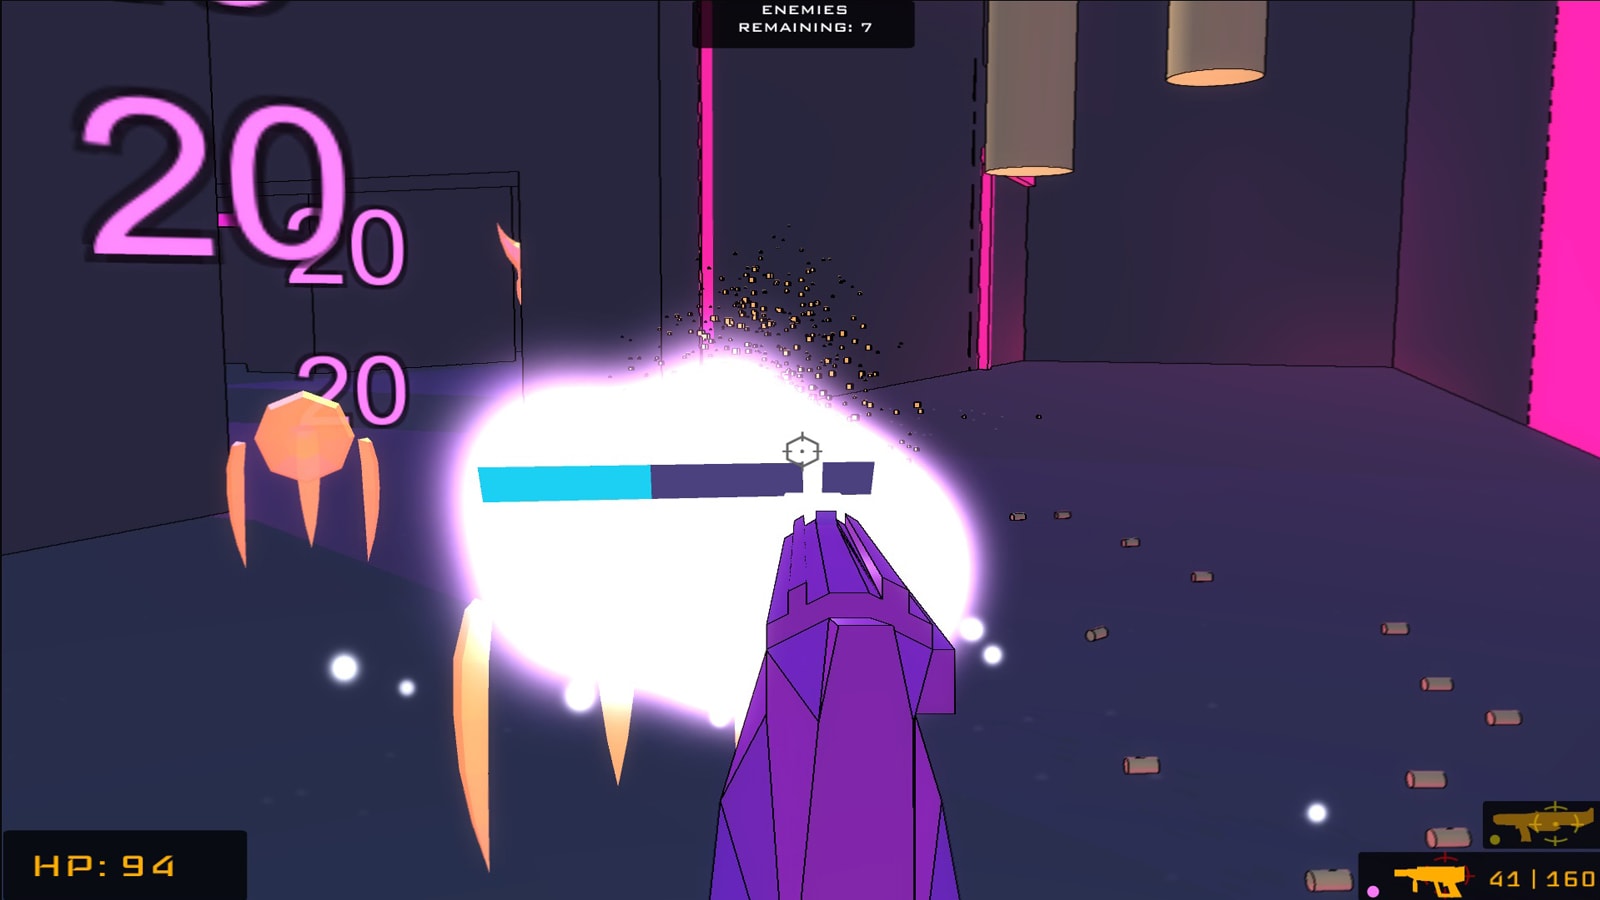 The player fires a glowing burst from a purple gun at a yellow anti-virus.